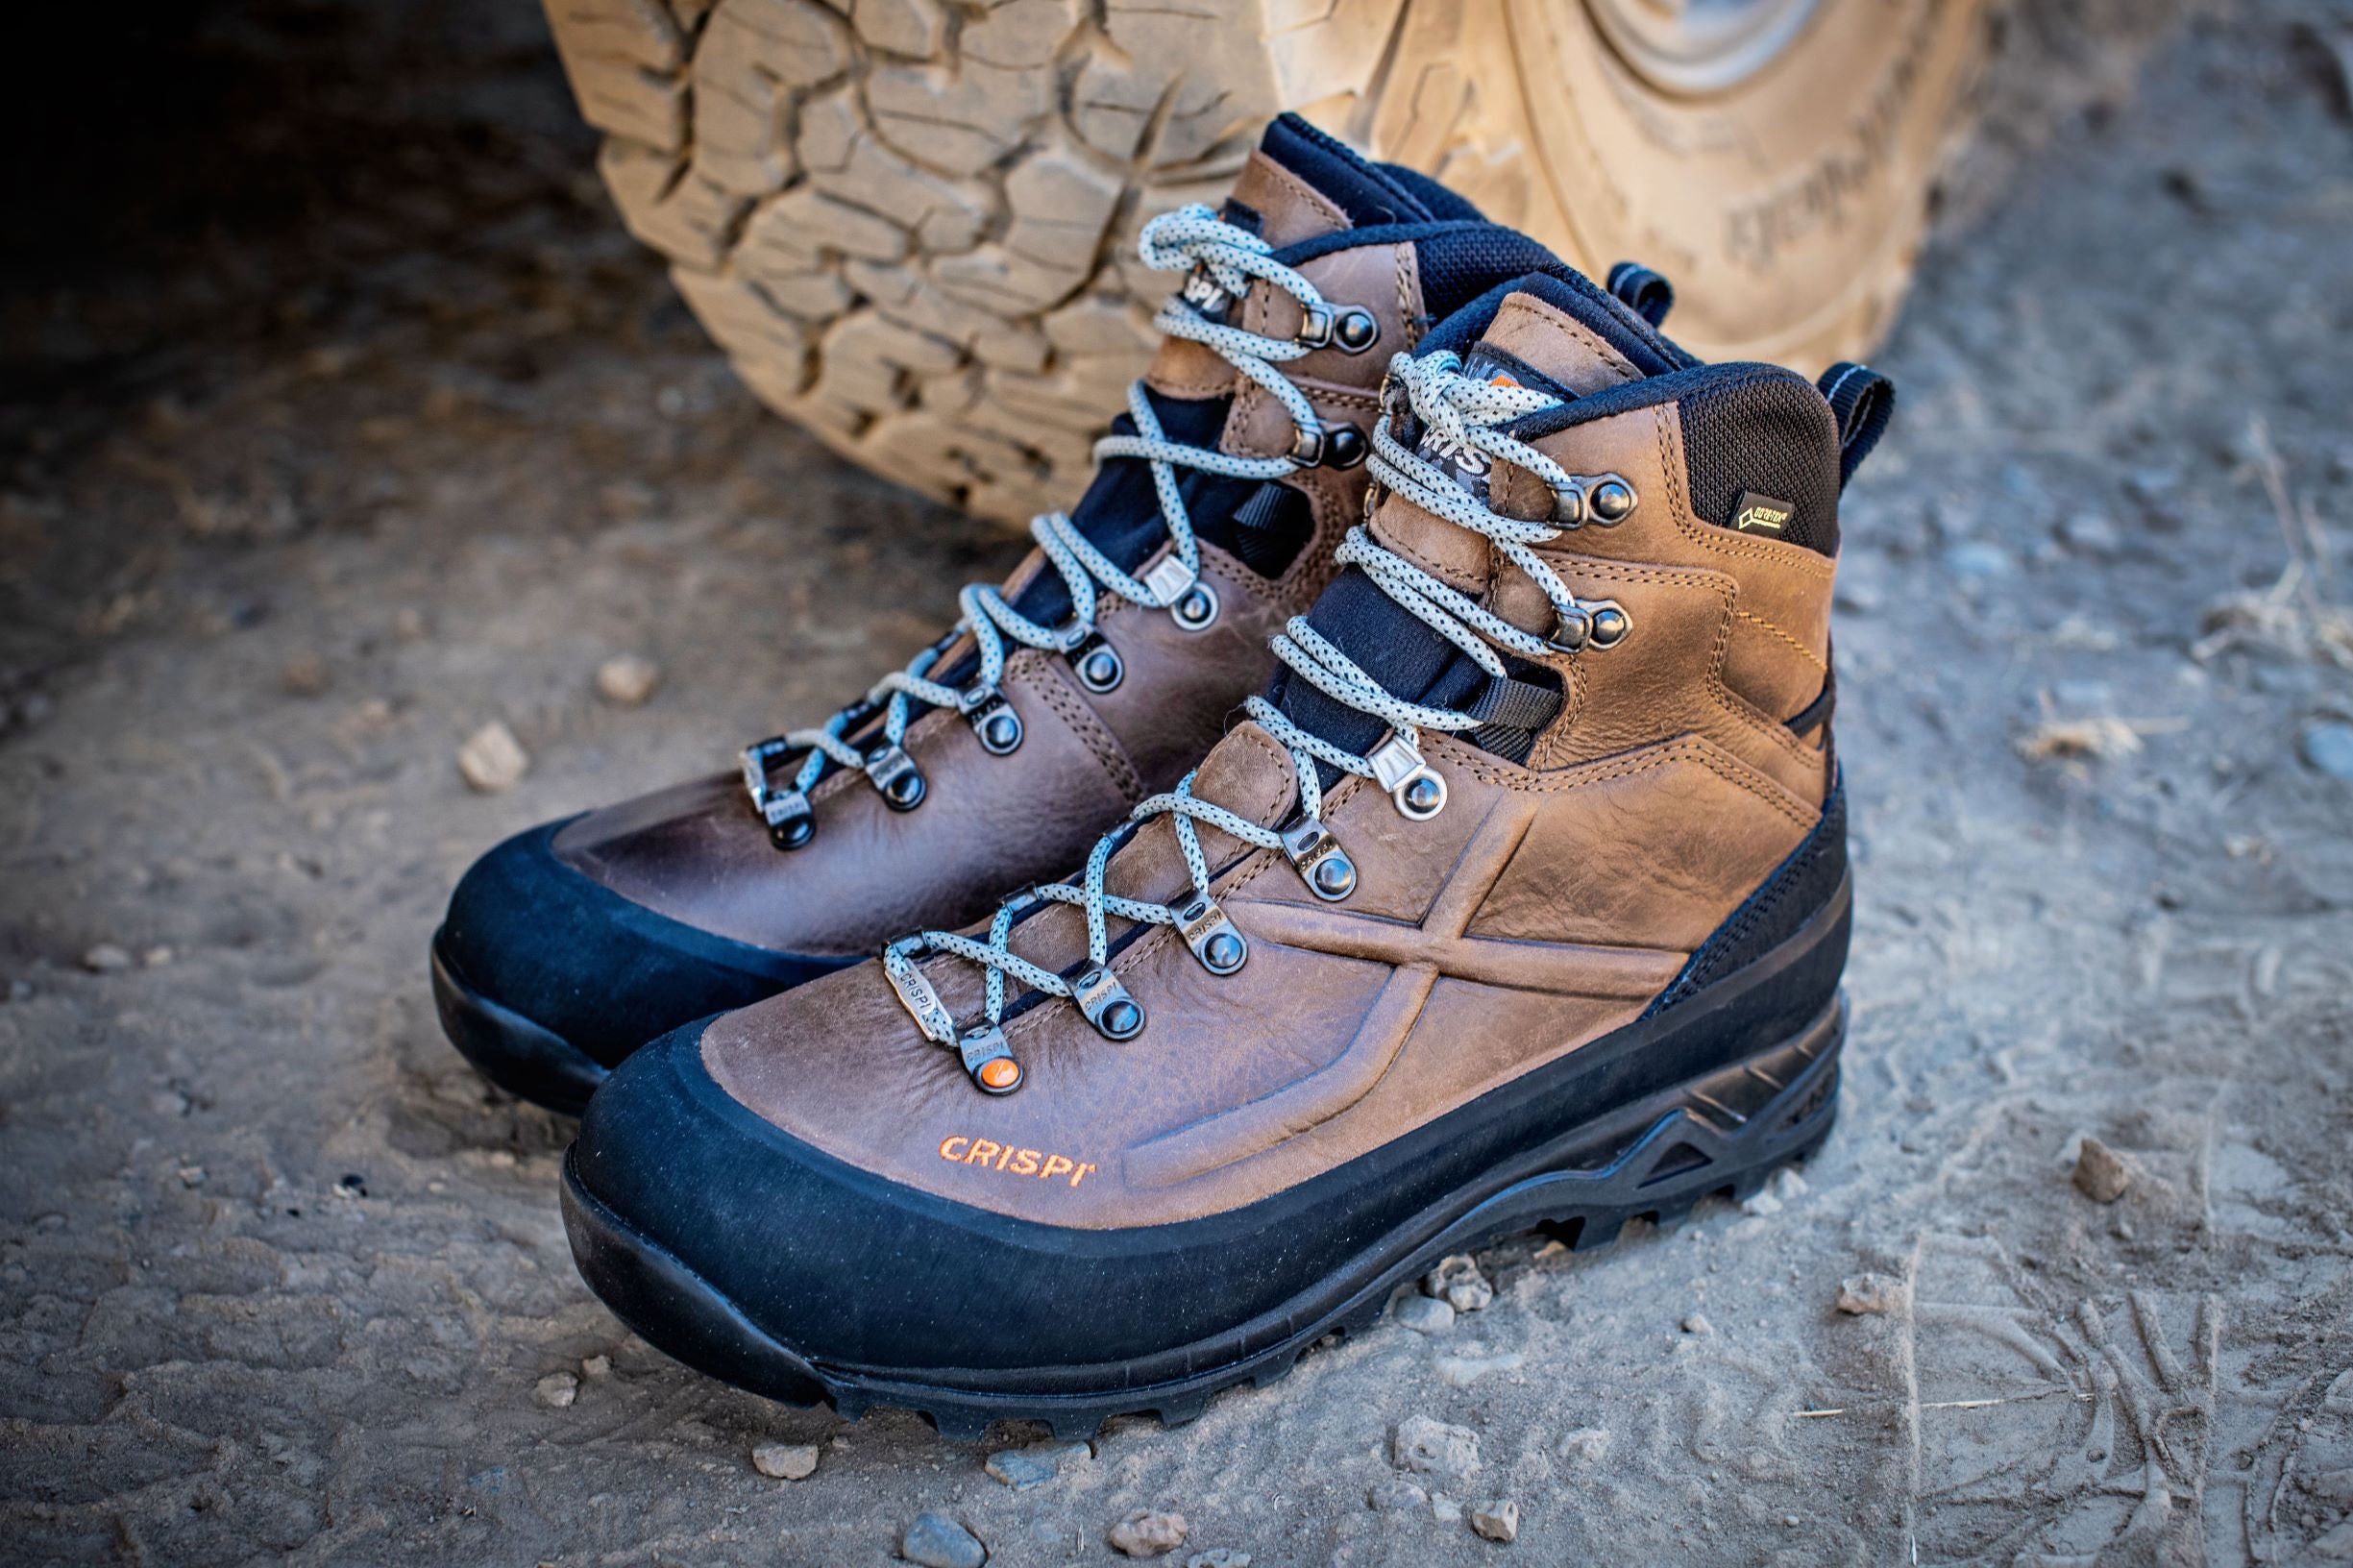 Crispi Valdres Plus GTX Non-Insulated Hunting Boots - Fin & Fire Fly Shop